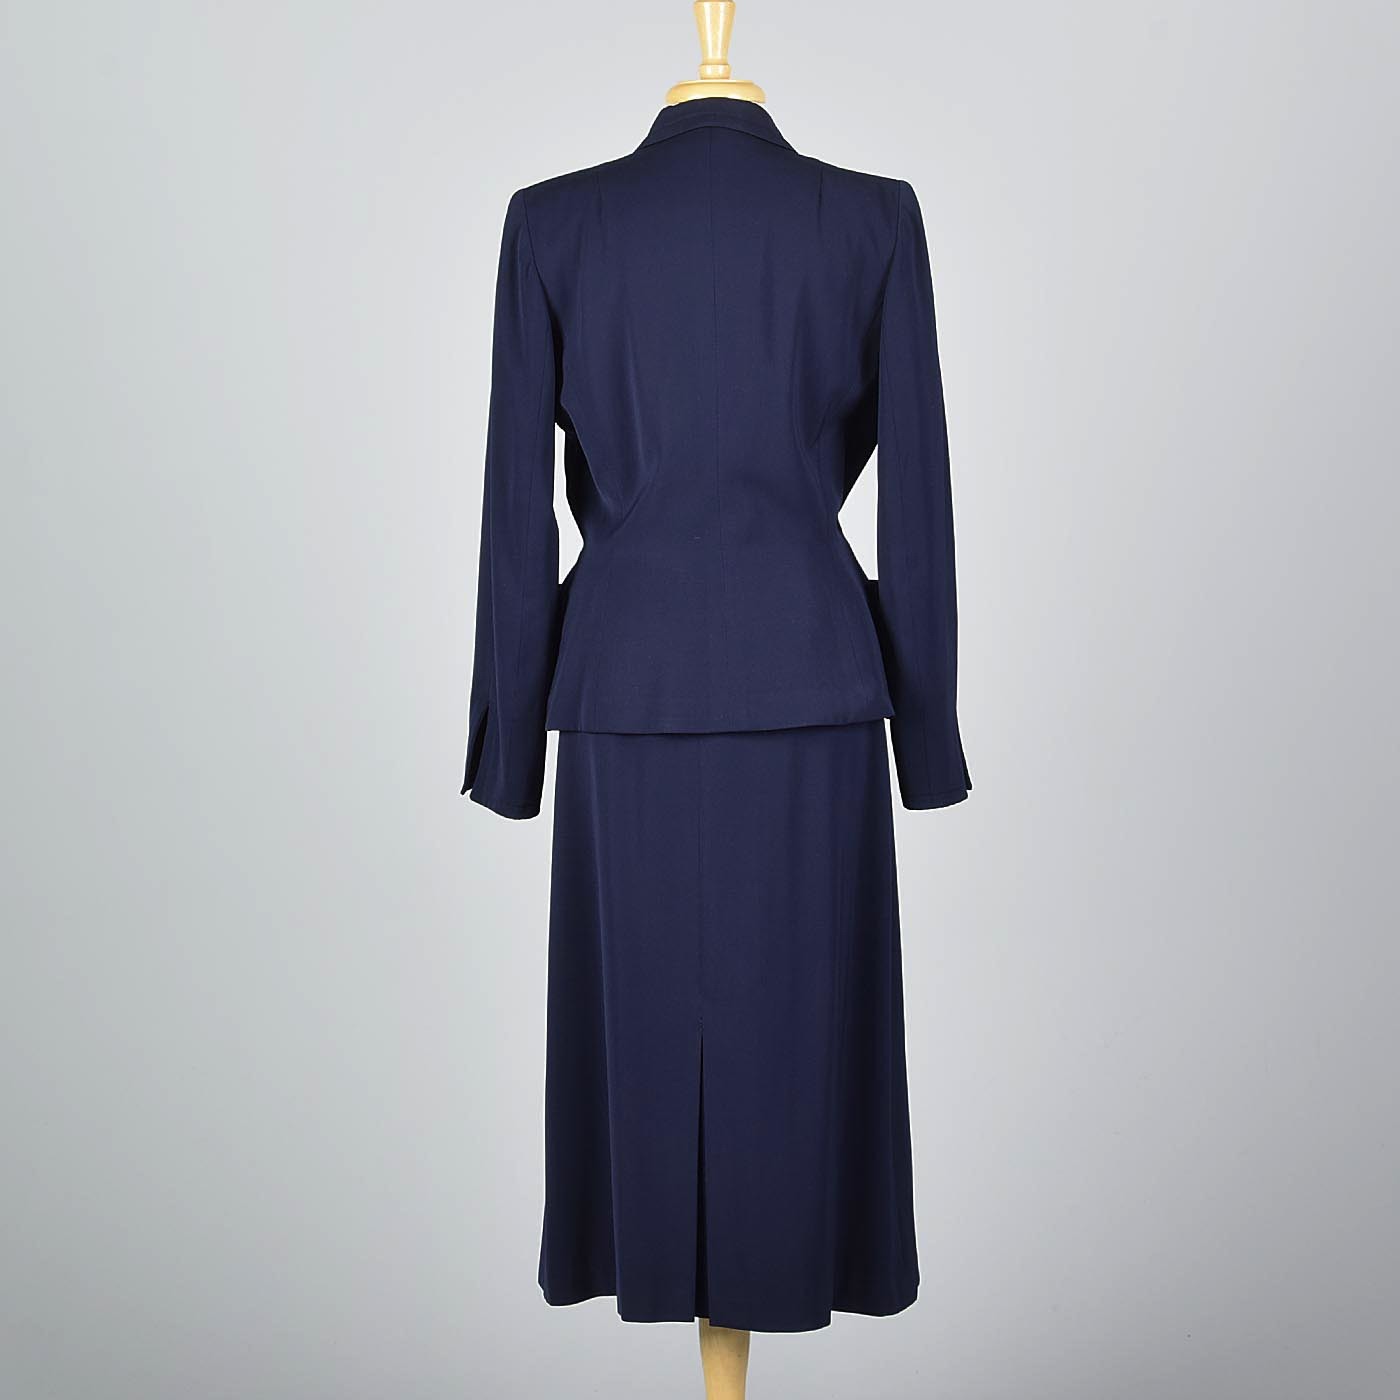 1950s Navy Blue Gabardine Skirt Suit with Shaped Hips & Weighted Hem